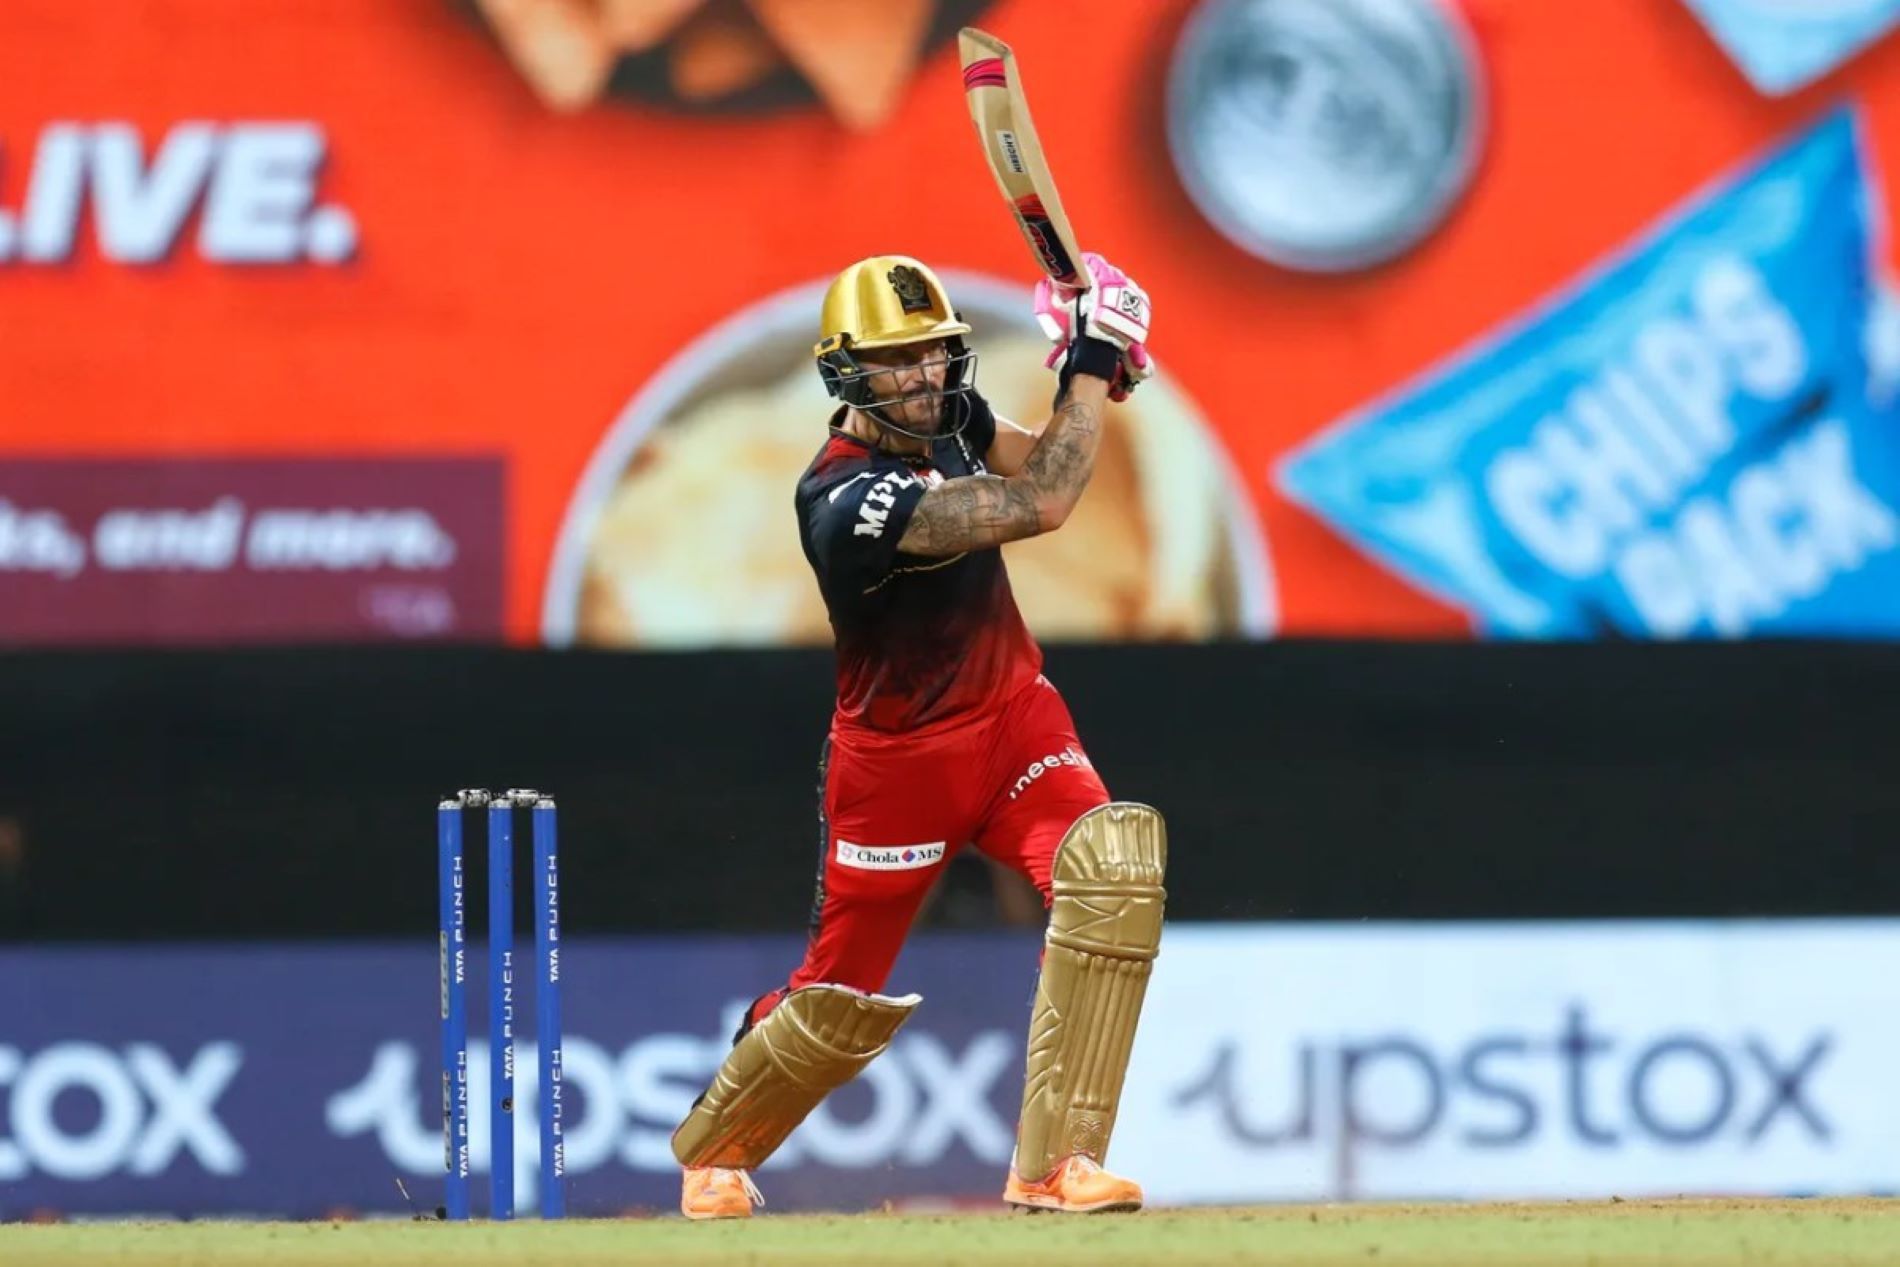 Faf du Plessis has been in red hot form this IPL season